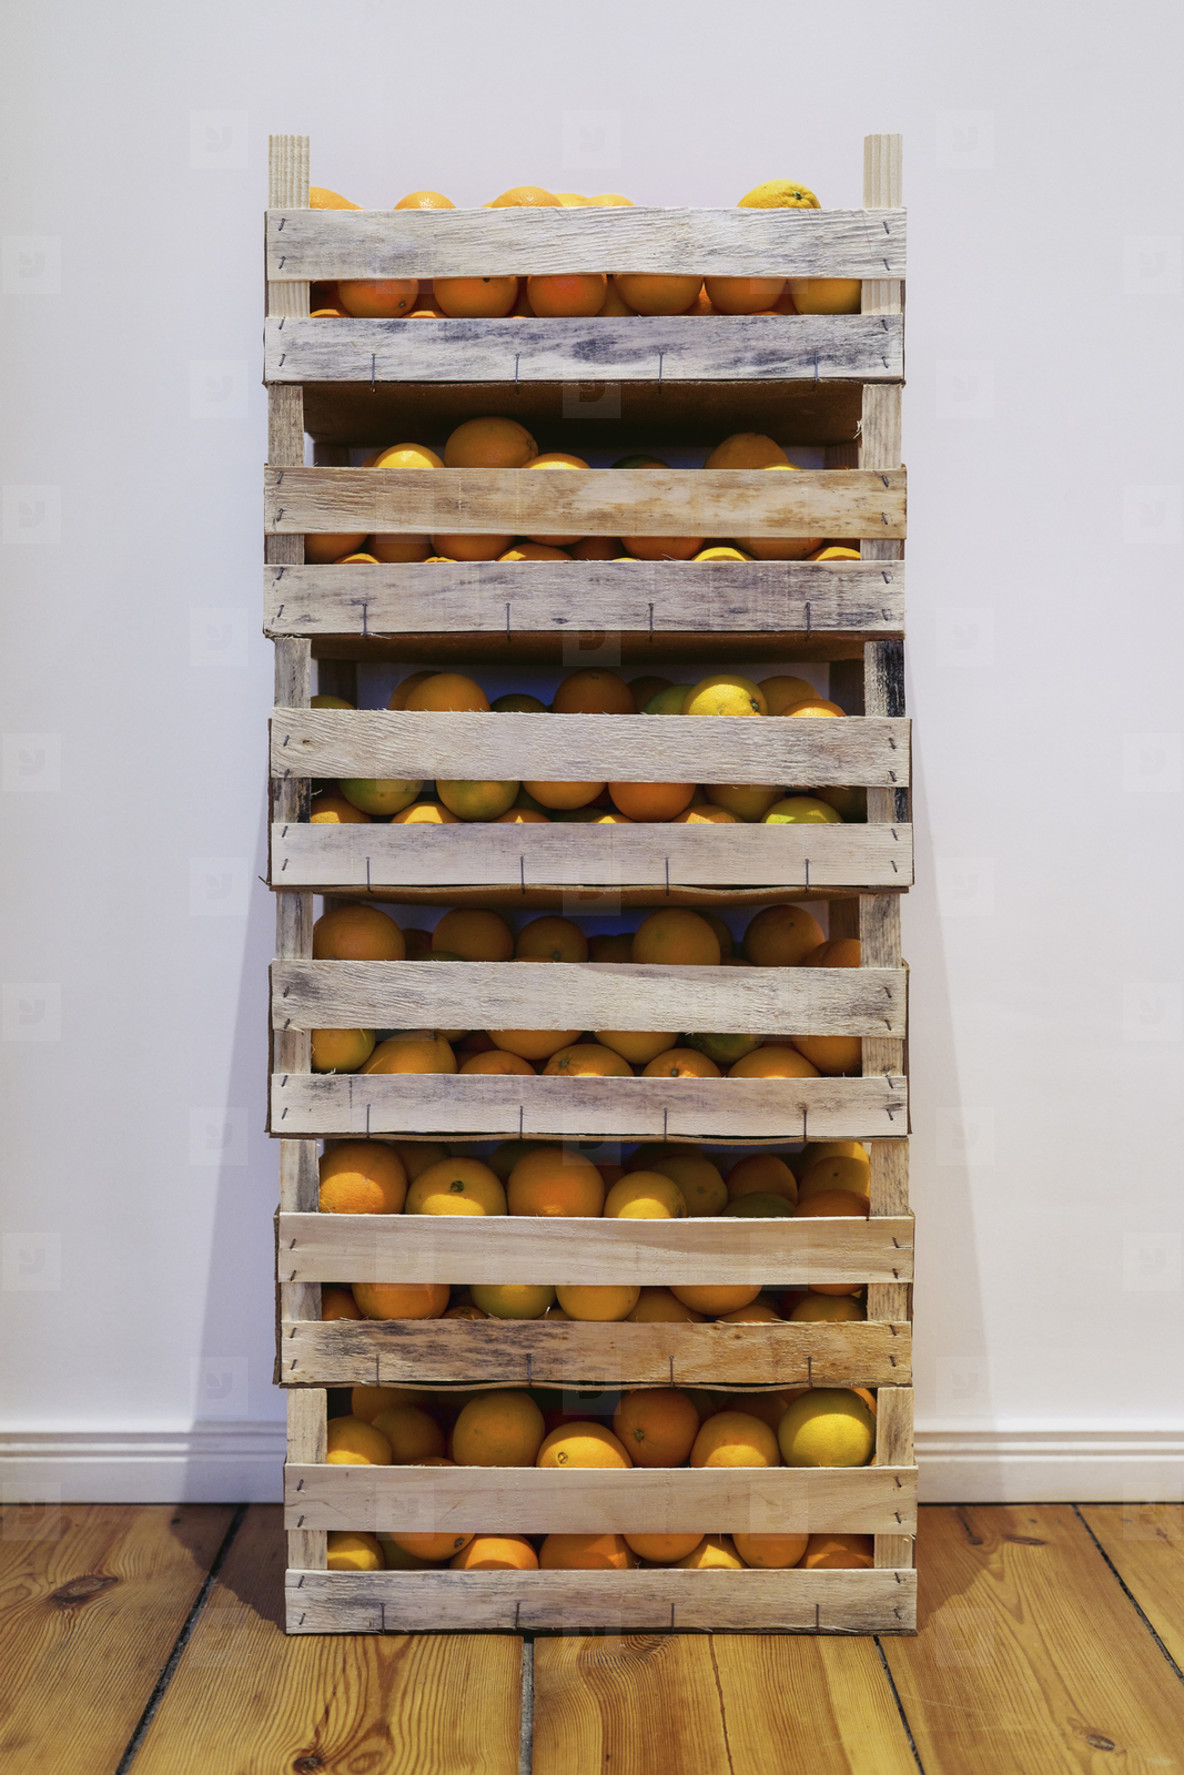 Crates of fresh harvested oranges stacked against wall